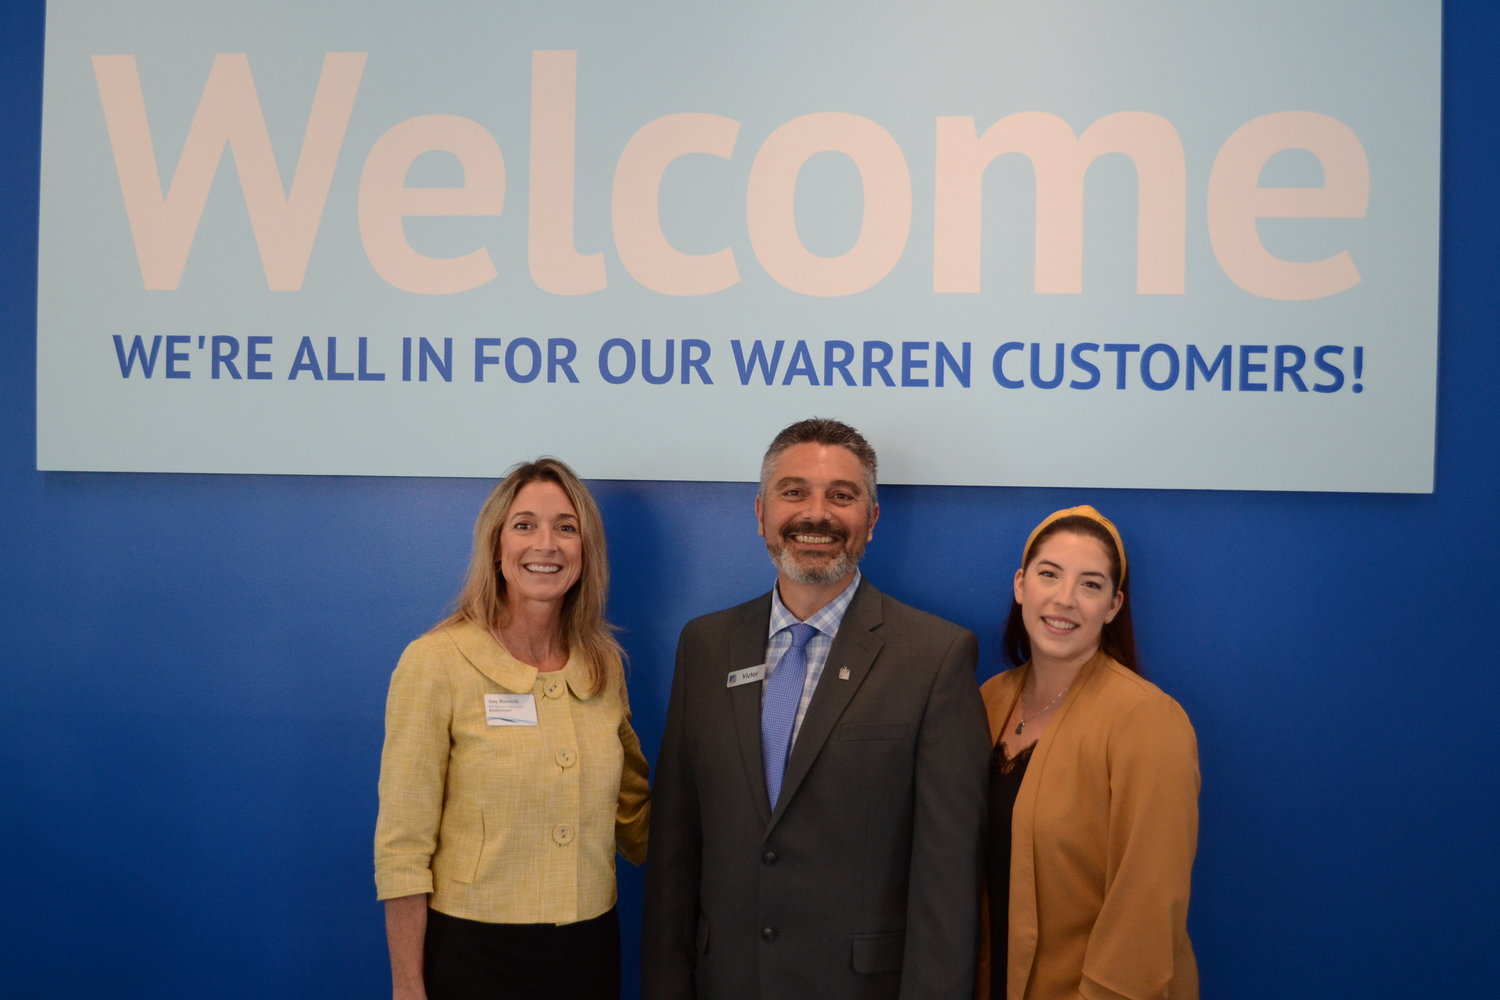 Amy Riccitelli, Director of Retail Sales, Victor Correia, and Rhiannon Phillips, universal banker for BankNewport, welcomed locals into the revamped branch on Friday morning.